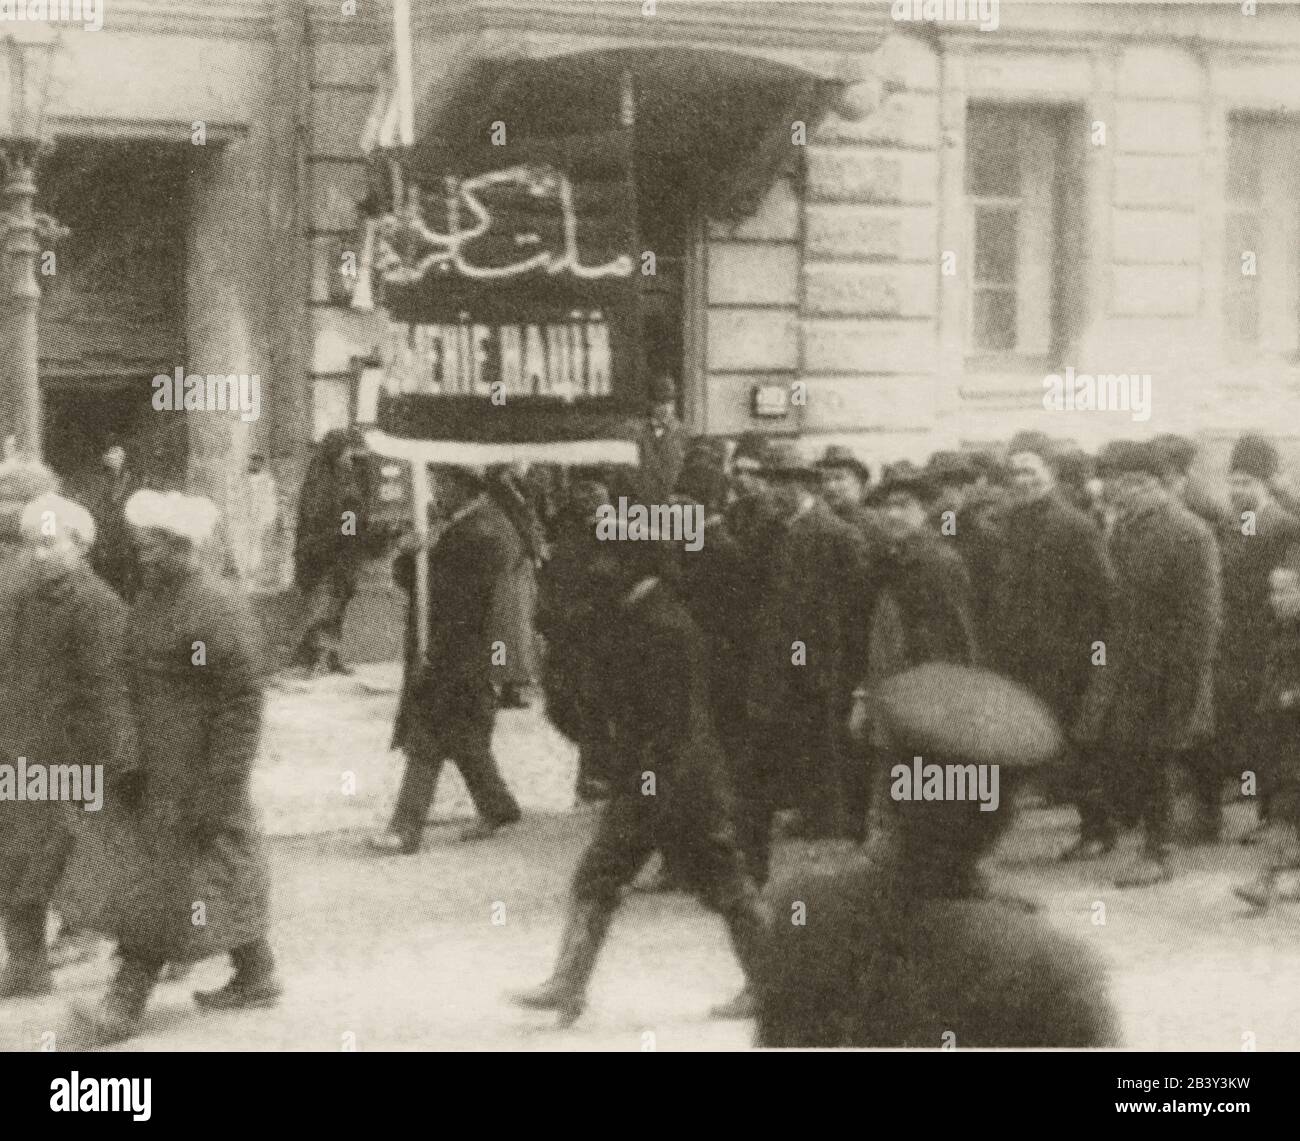 Muslims participating in the demonstration on May 1, 1917 in Petrograd. Stock Photo